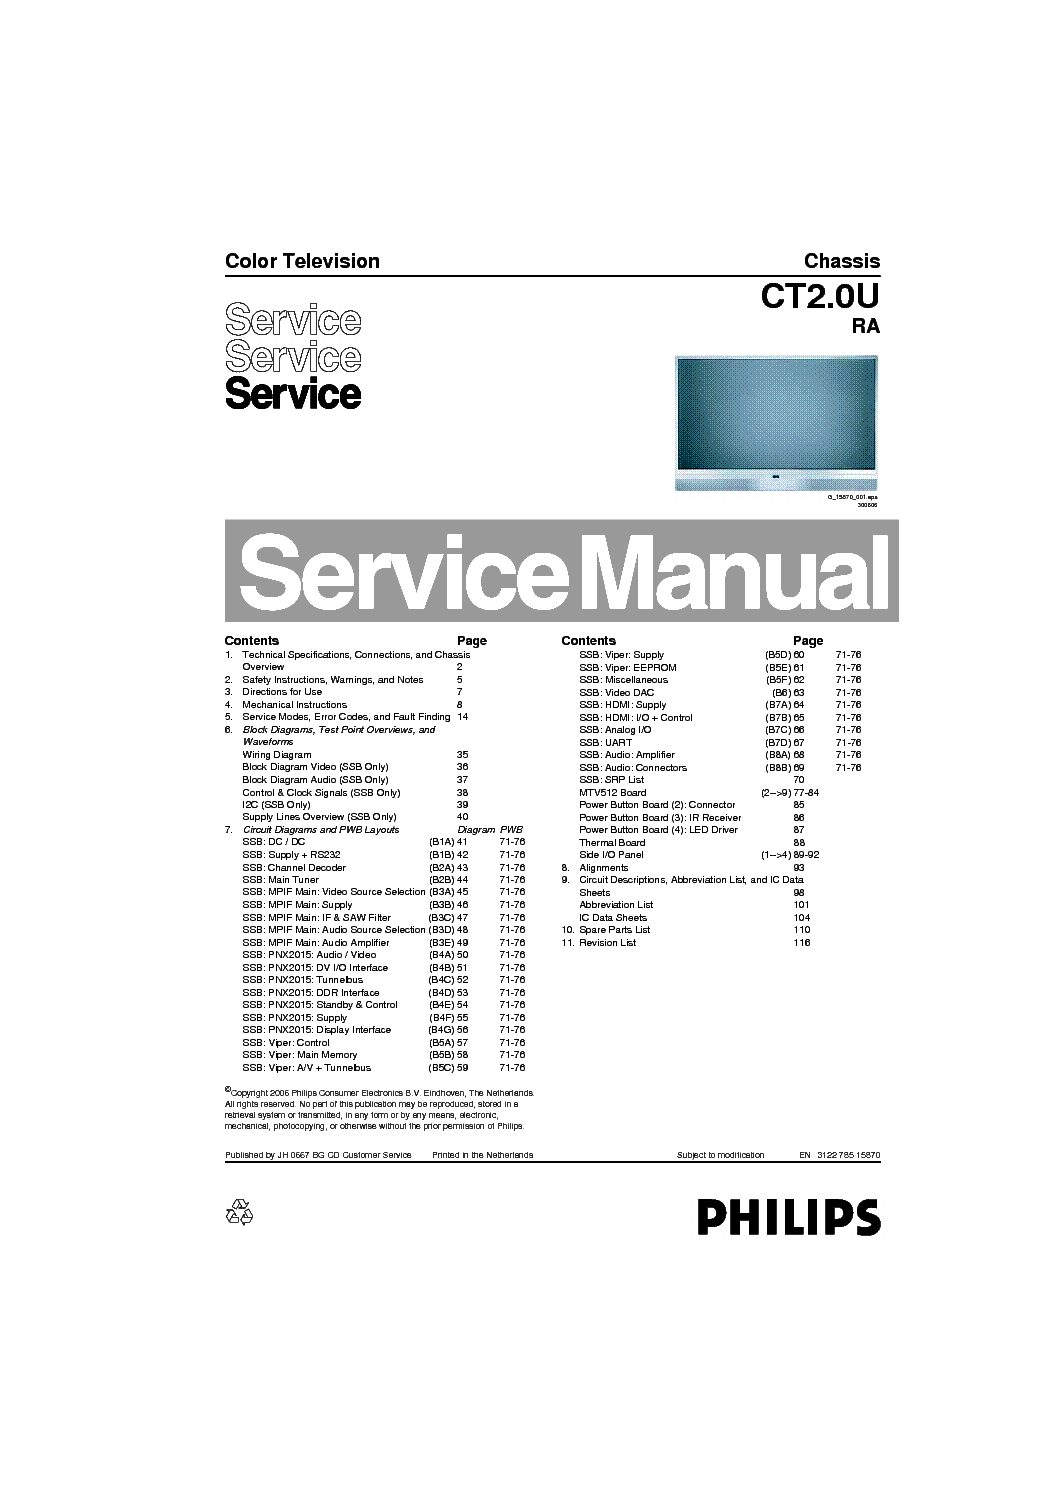 PHILIPS CHASSIS CT2.0U RA service manual (1st page)